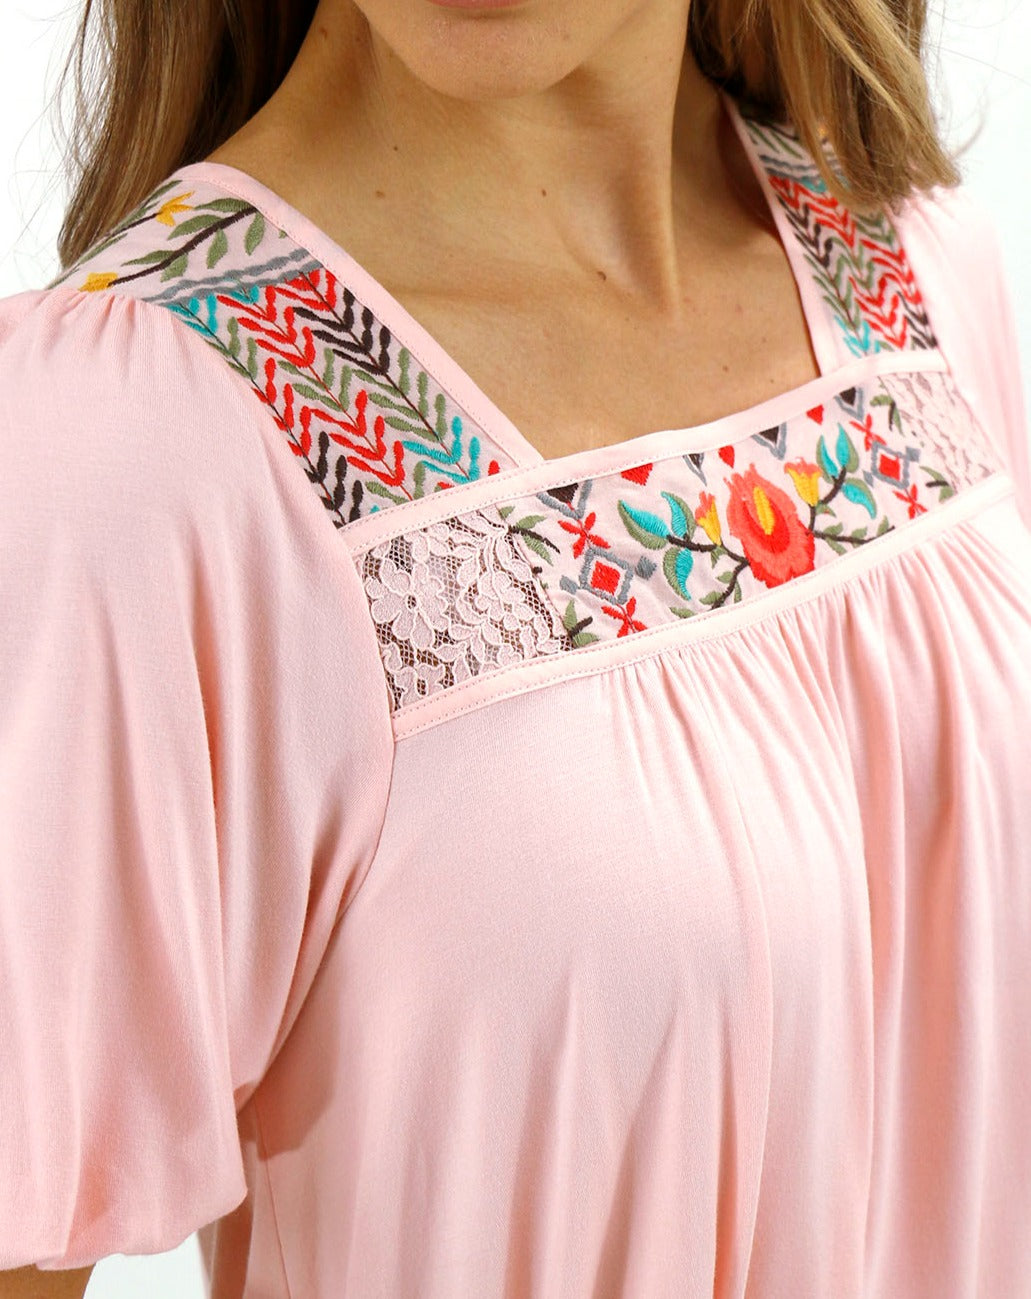 Island Embroidered Top - FINAL SALE